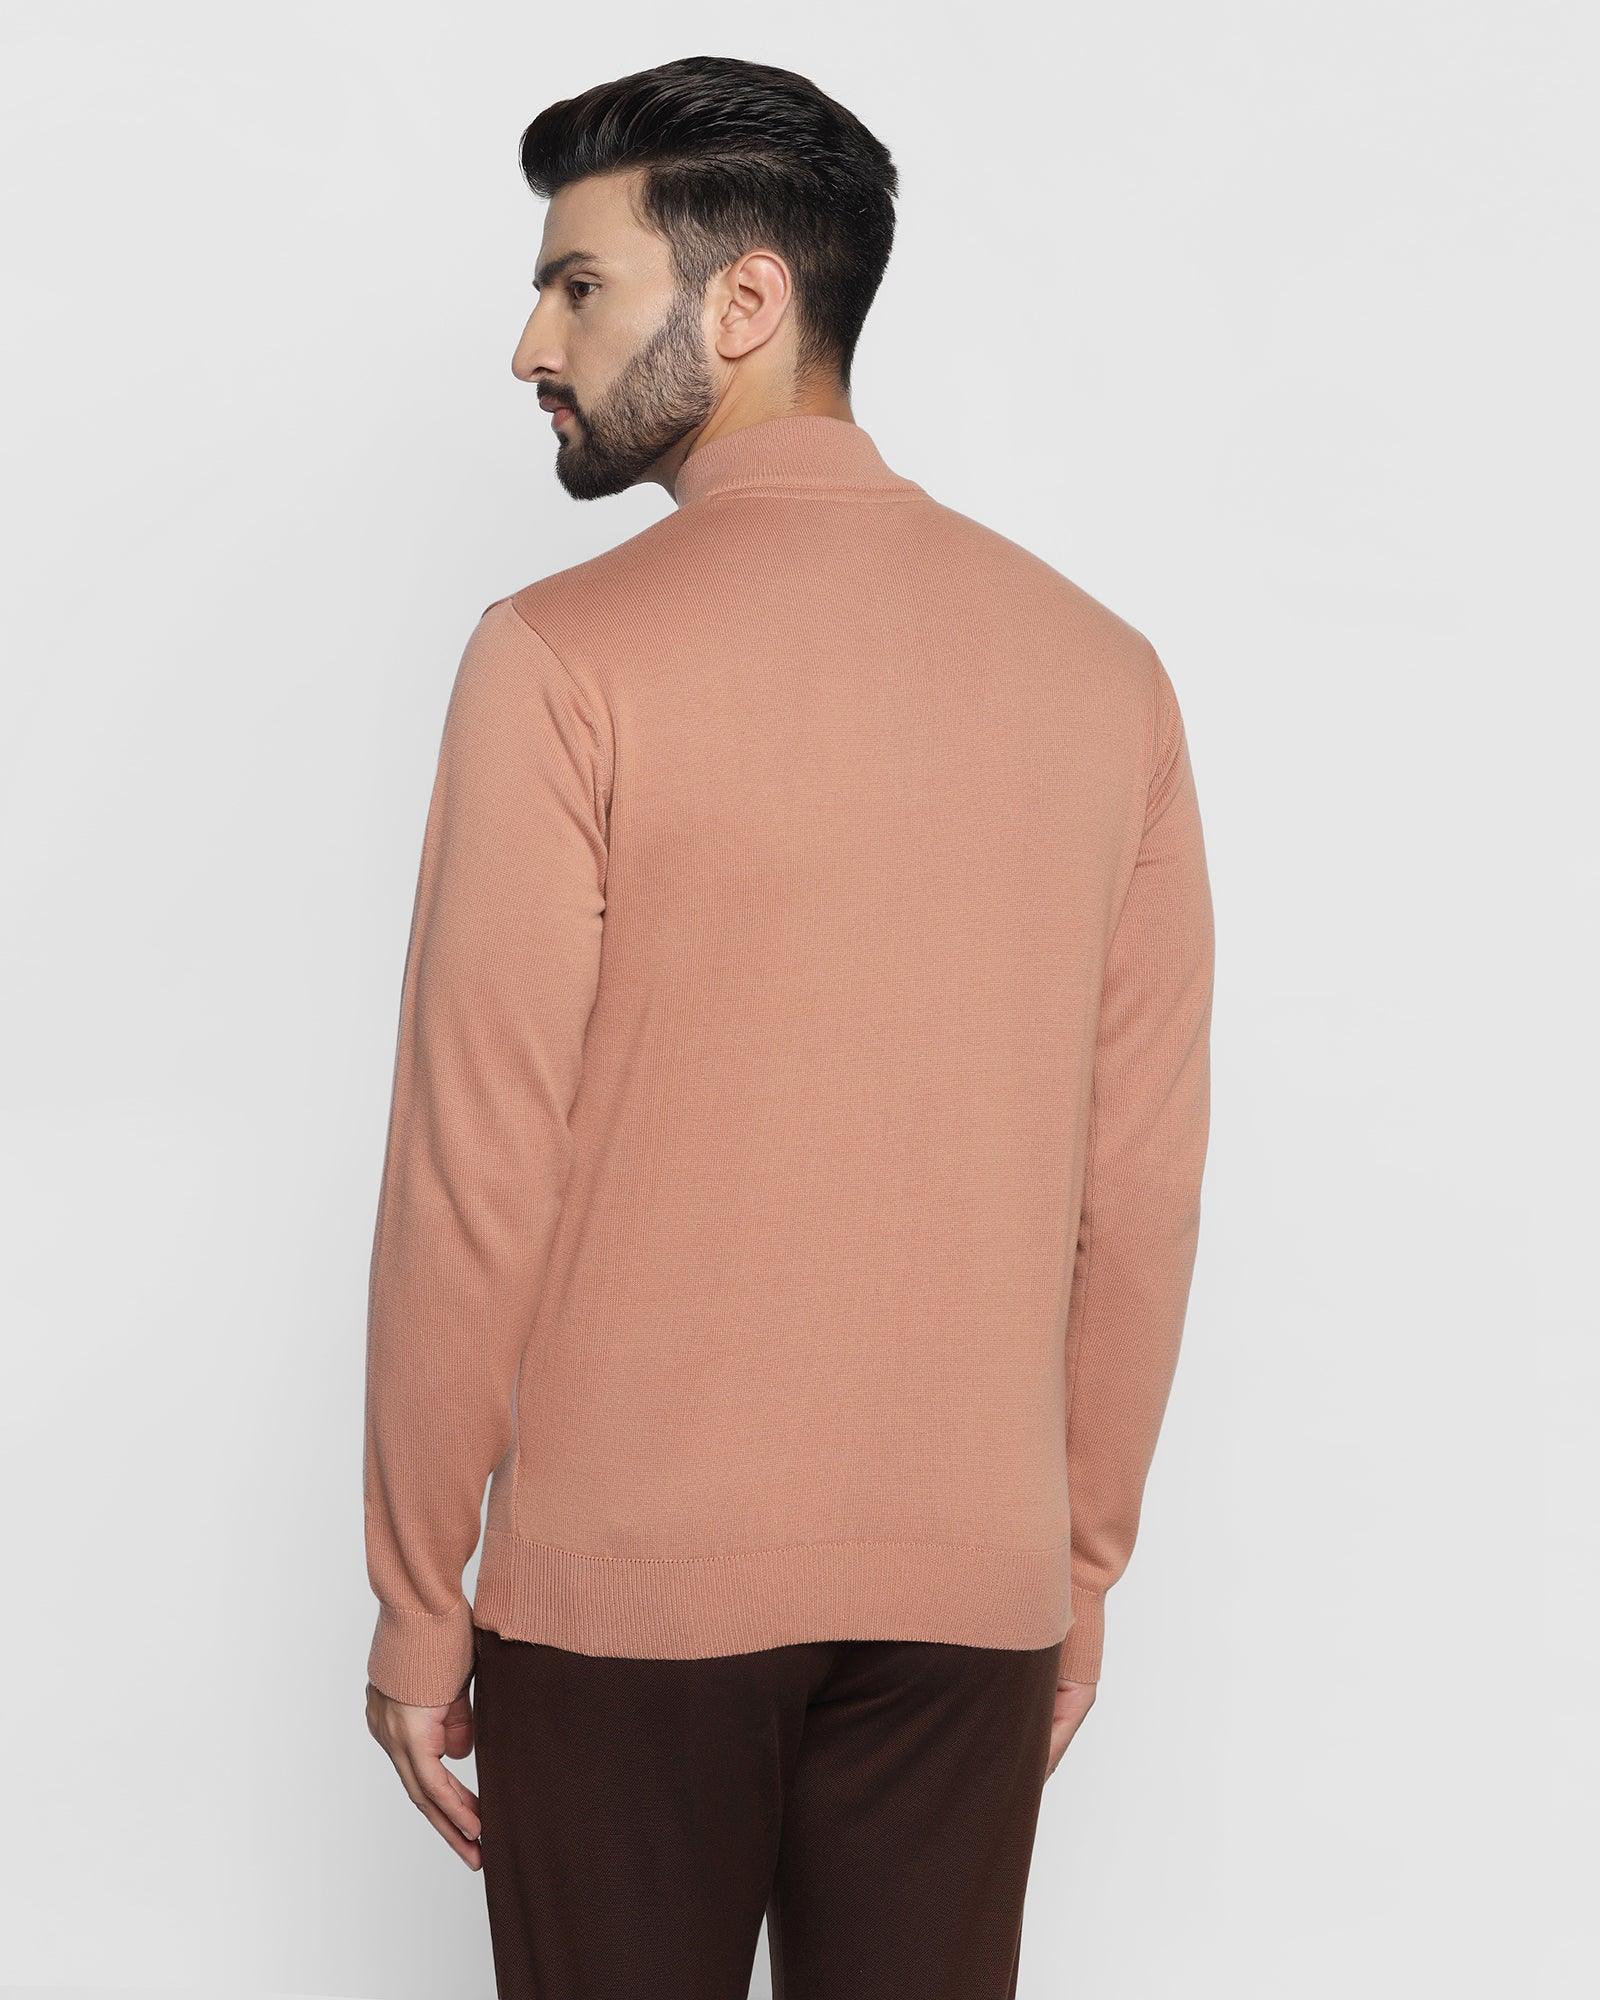 Stylized Collar Sand Stone Solid Sweater - Denver